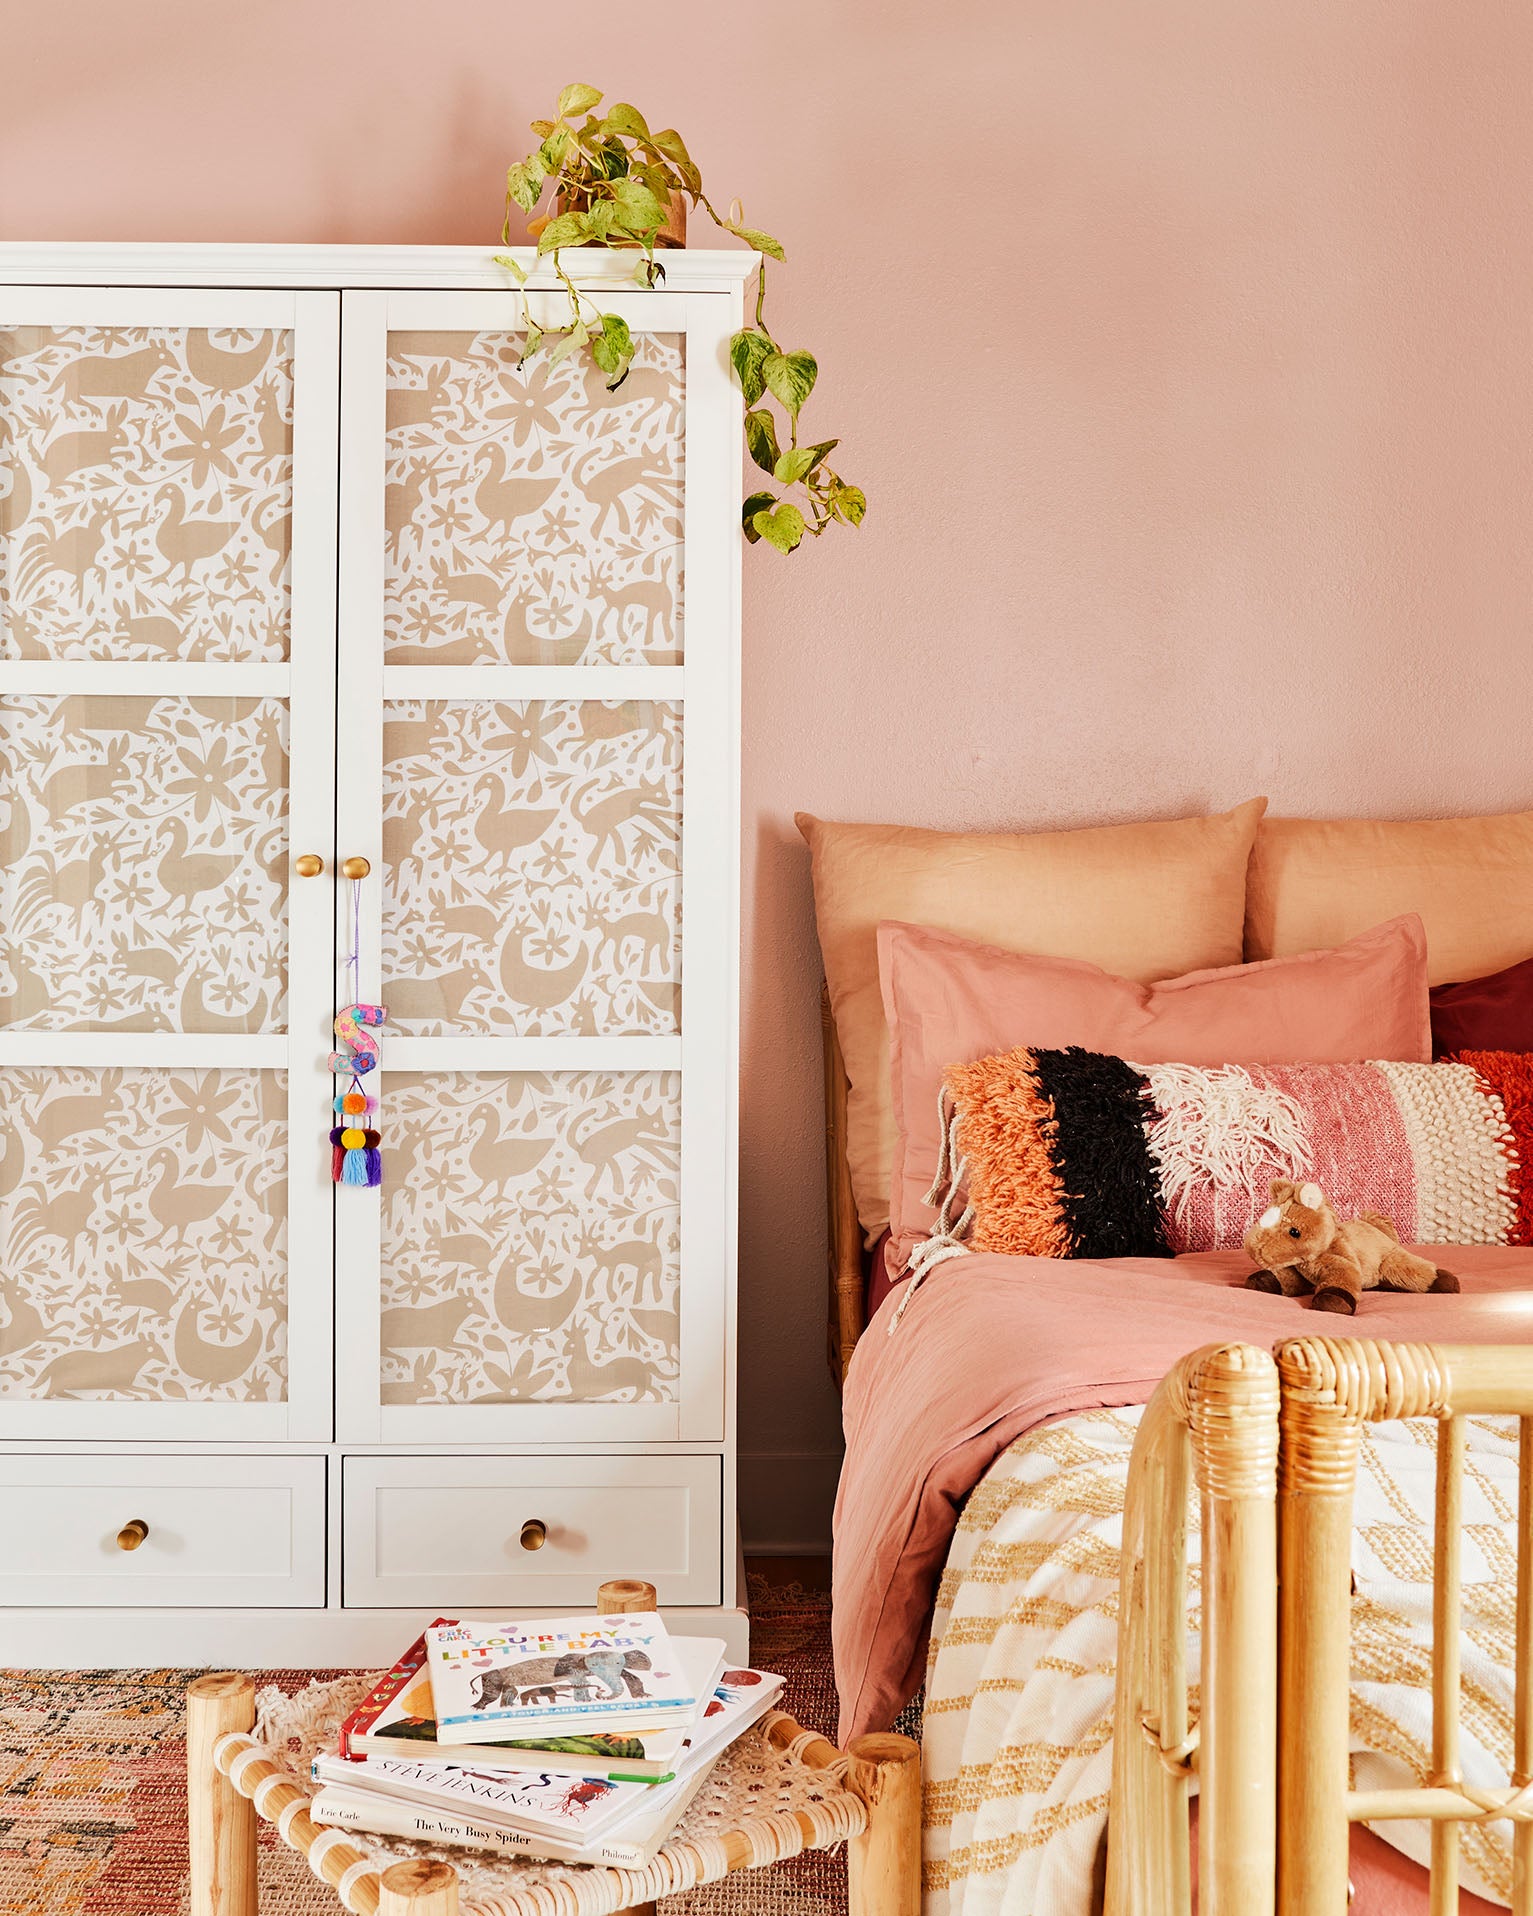 Choose furniture with a long lifespan when decorating a little girl's room--no need to stick to toddler-sized pieces.